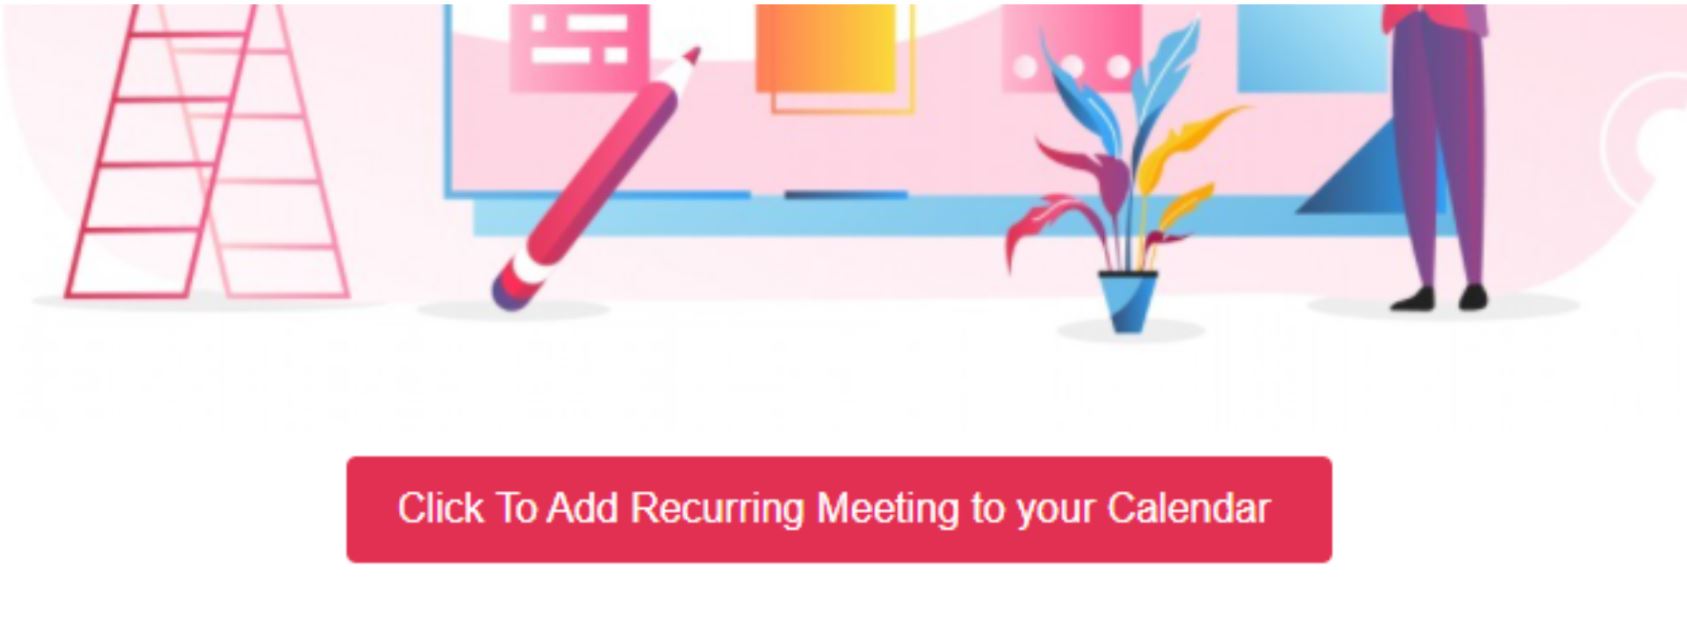 Click_to_Add_Recurring_Meeting_to_your_Calendar.JPG